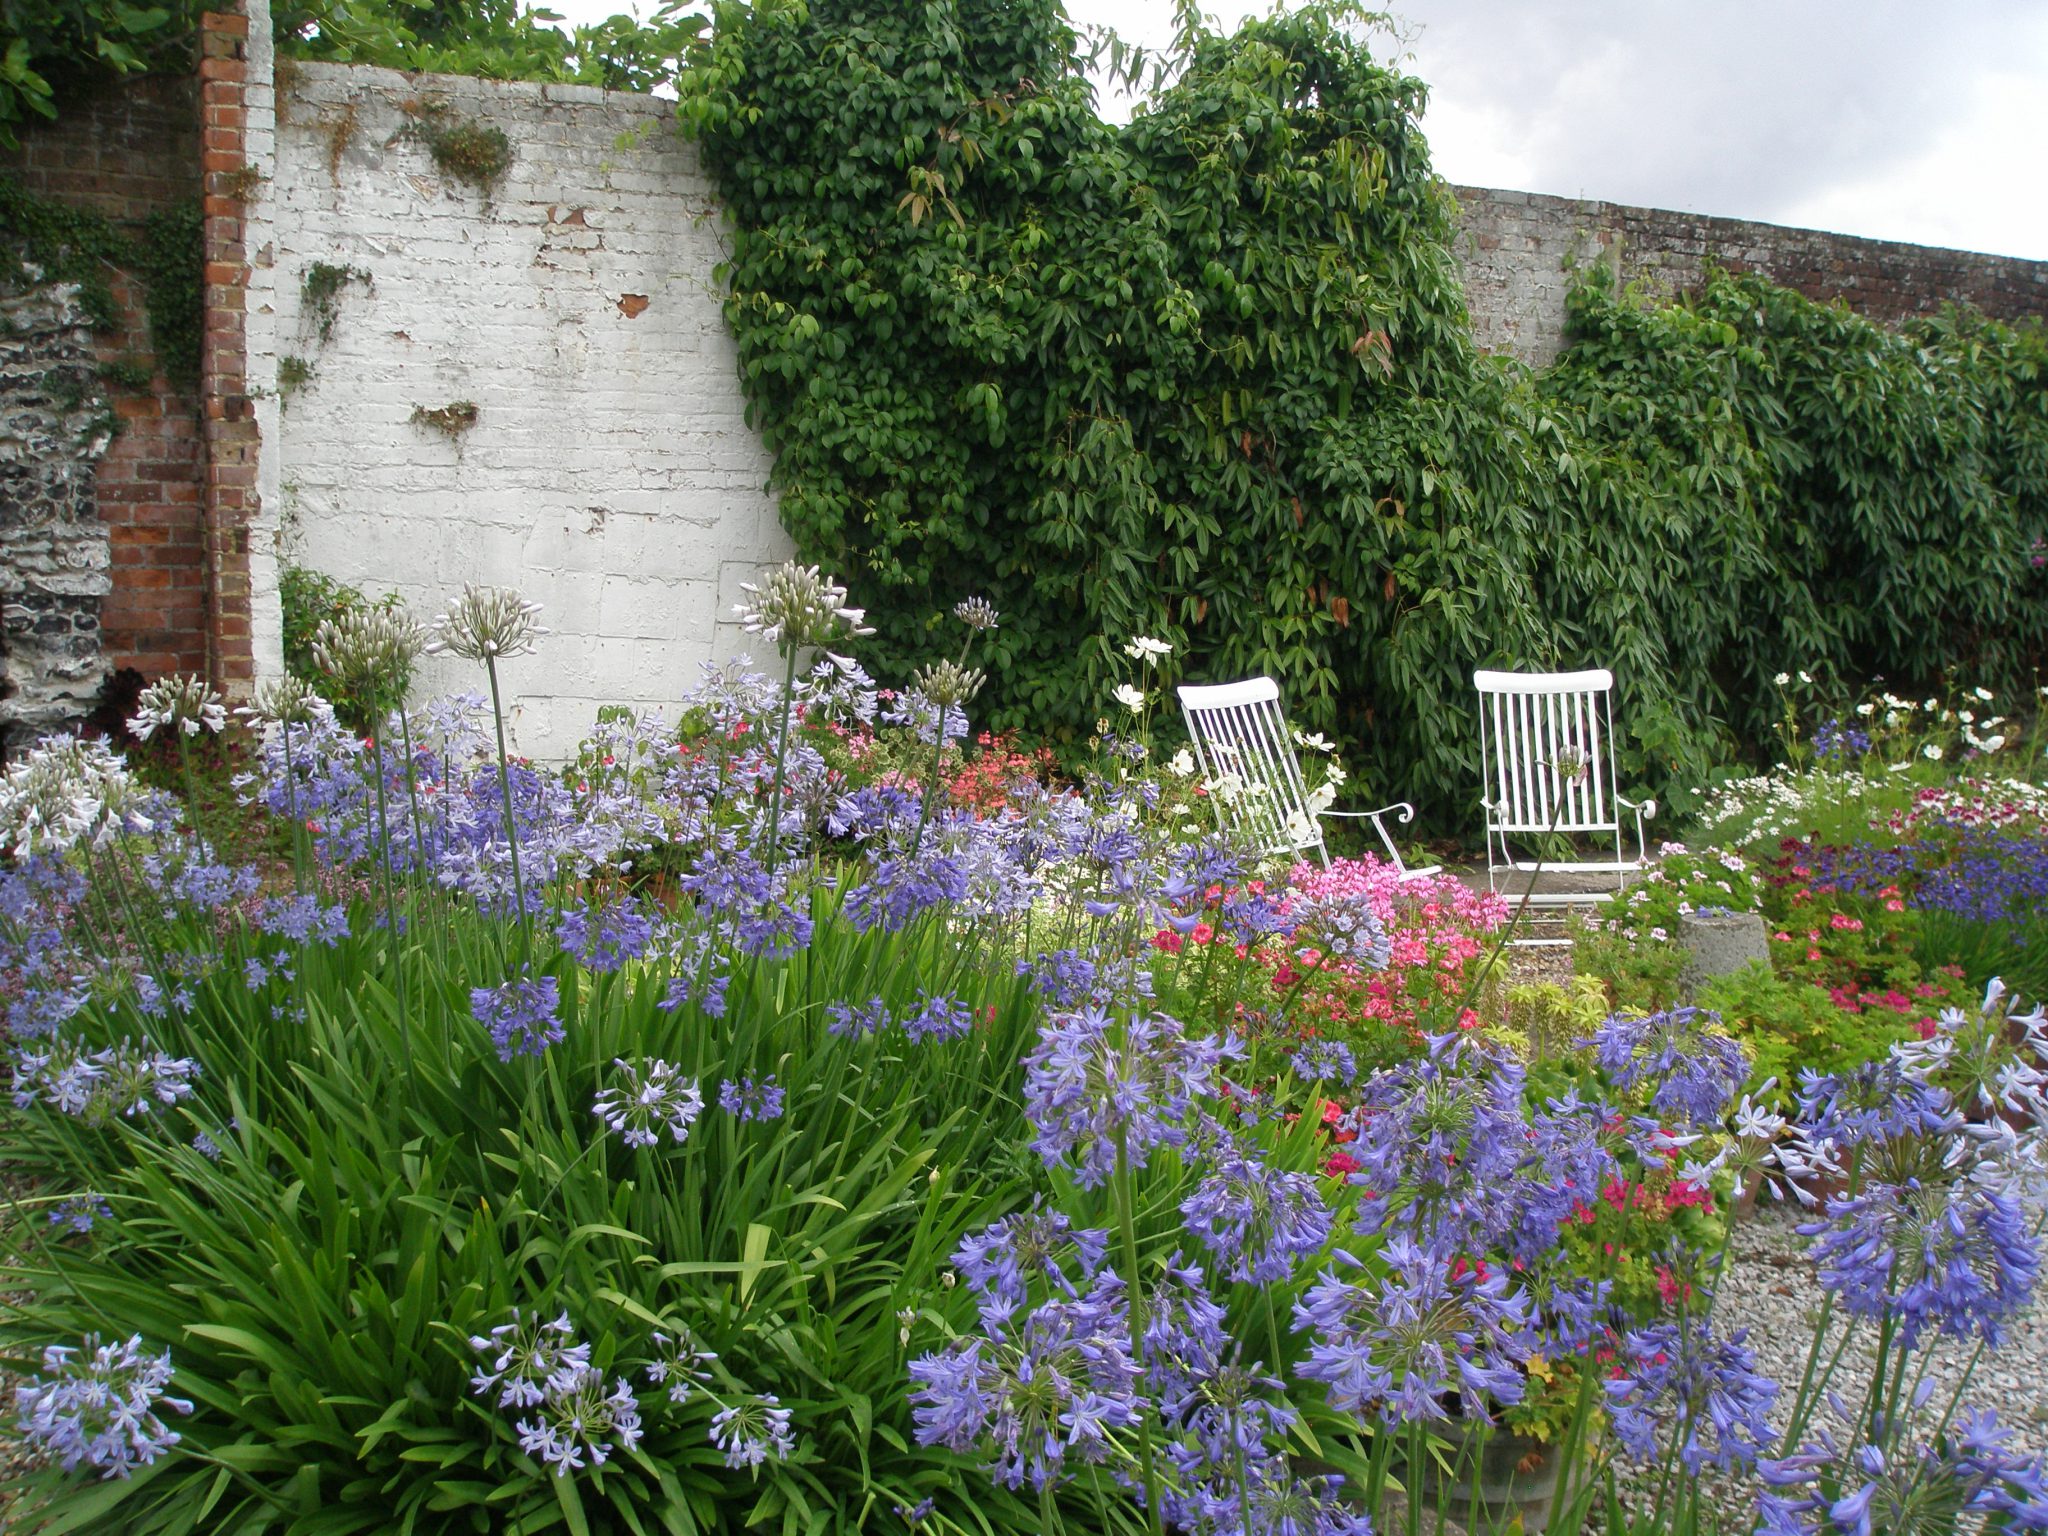 We prepared to leave the Walled Garden, but paused to admire this lush stand of Agapanthus.